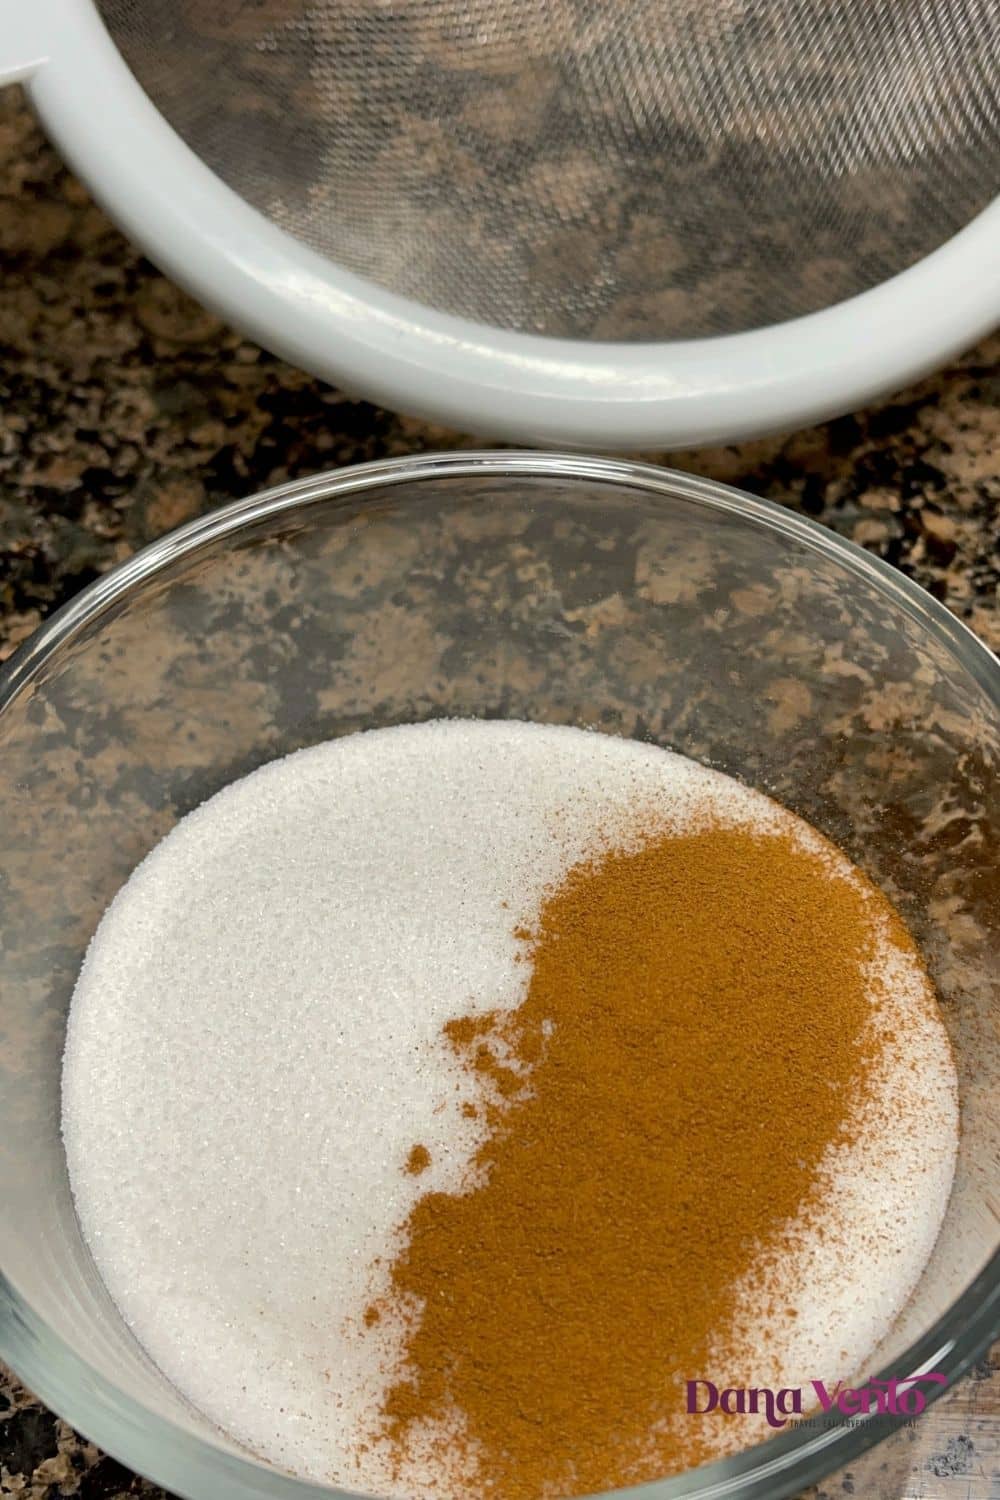 cinnamon and sugar for topping the baked churro